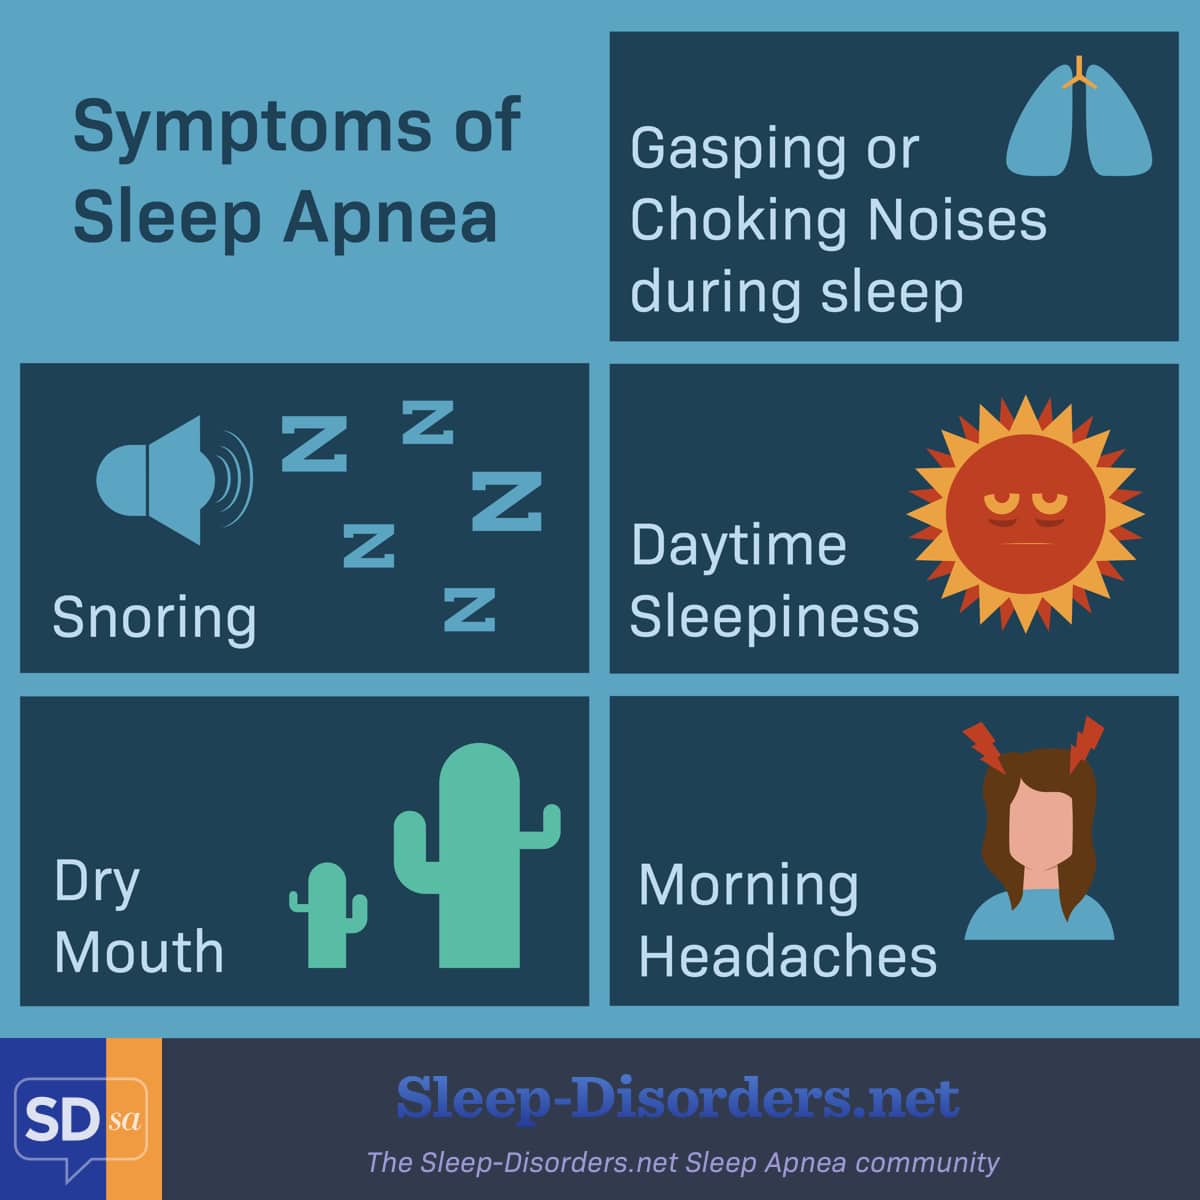 Symptoms of sleep apnea include snoring, gasping or choking during sleep, daytime sleepiness, dry mouth, and morning headache